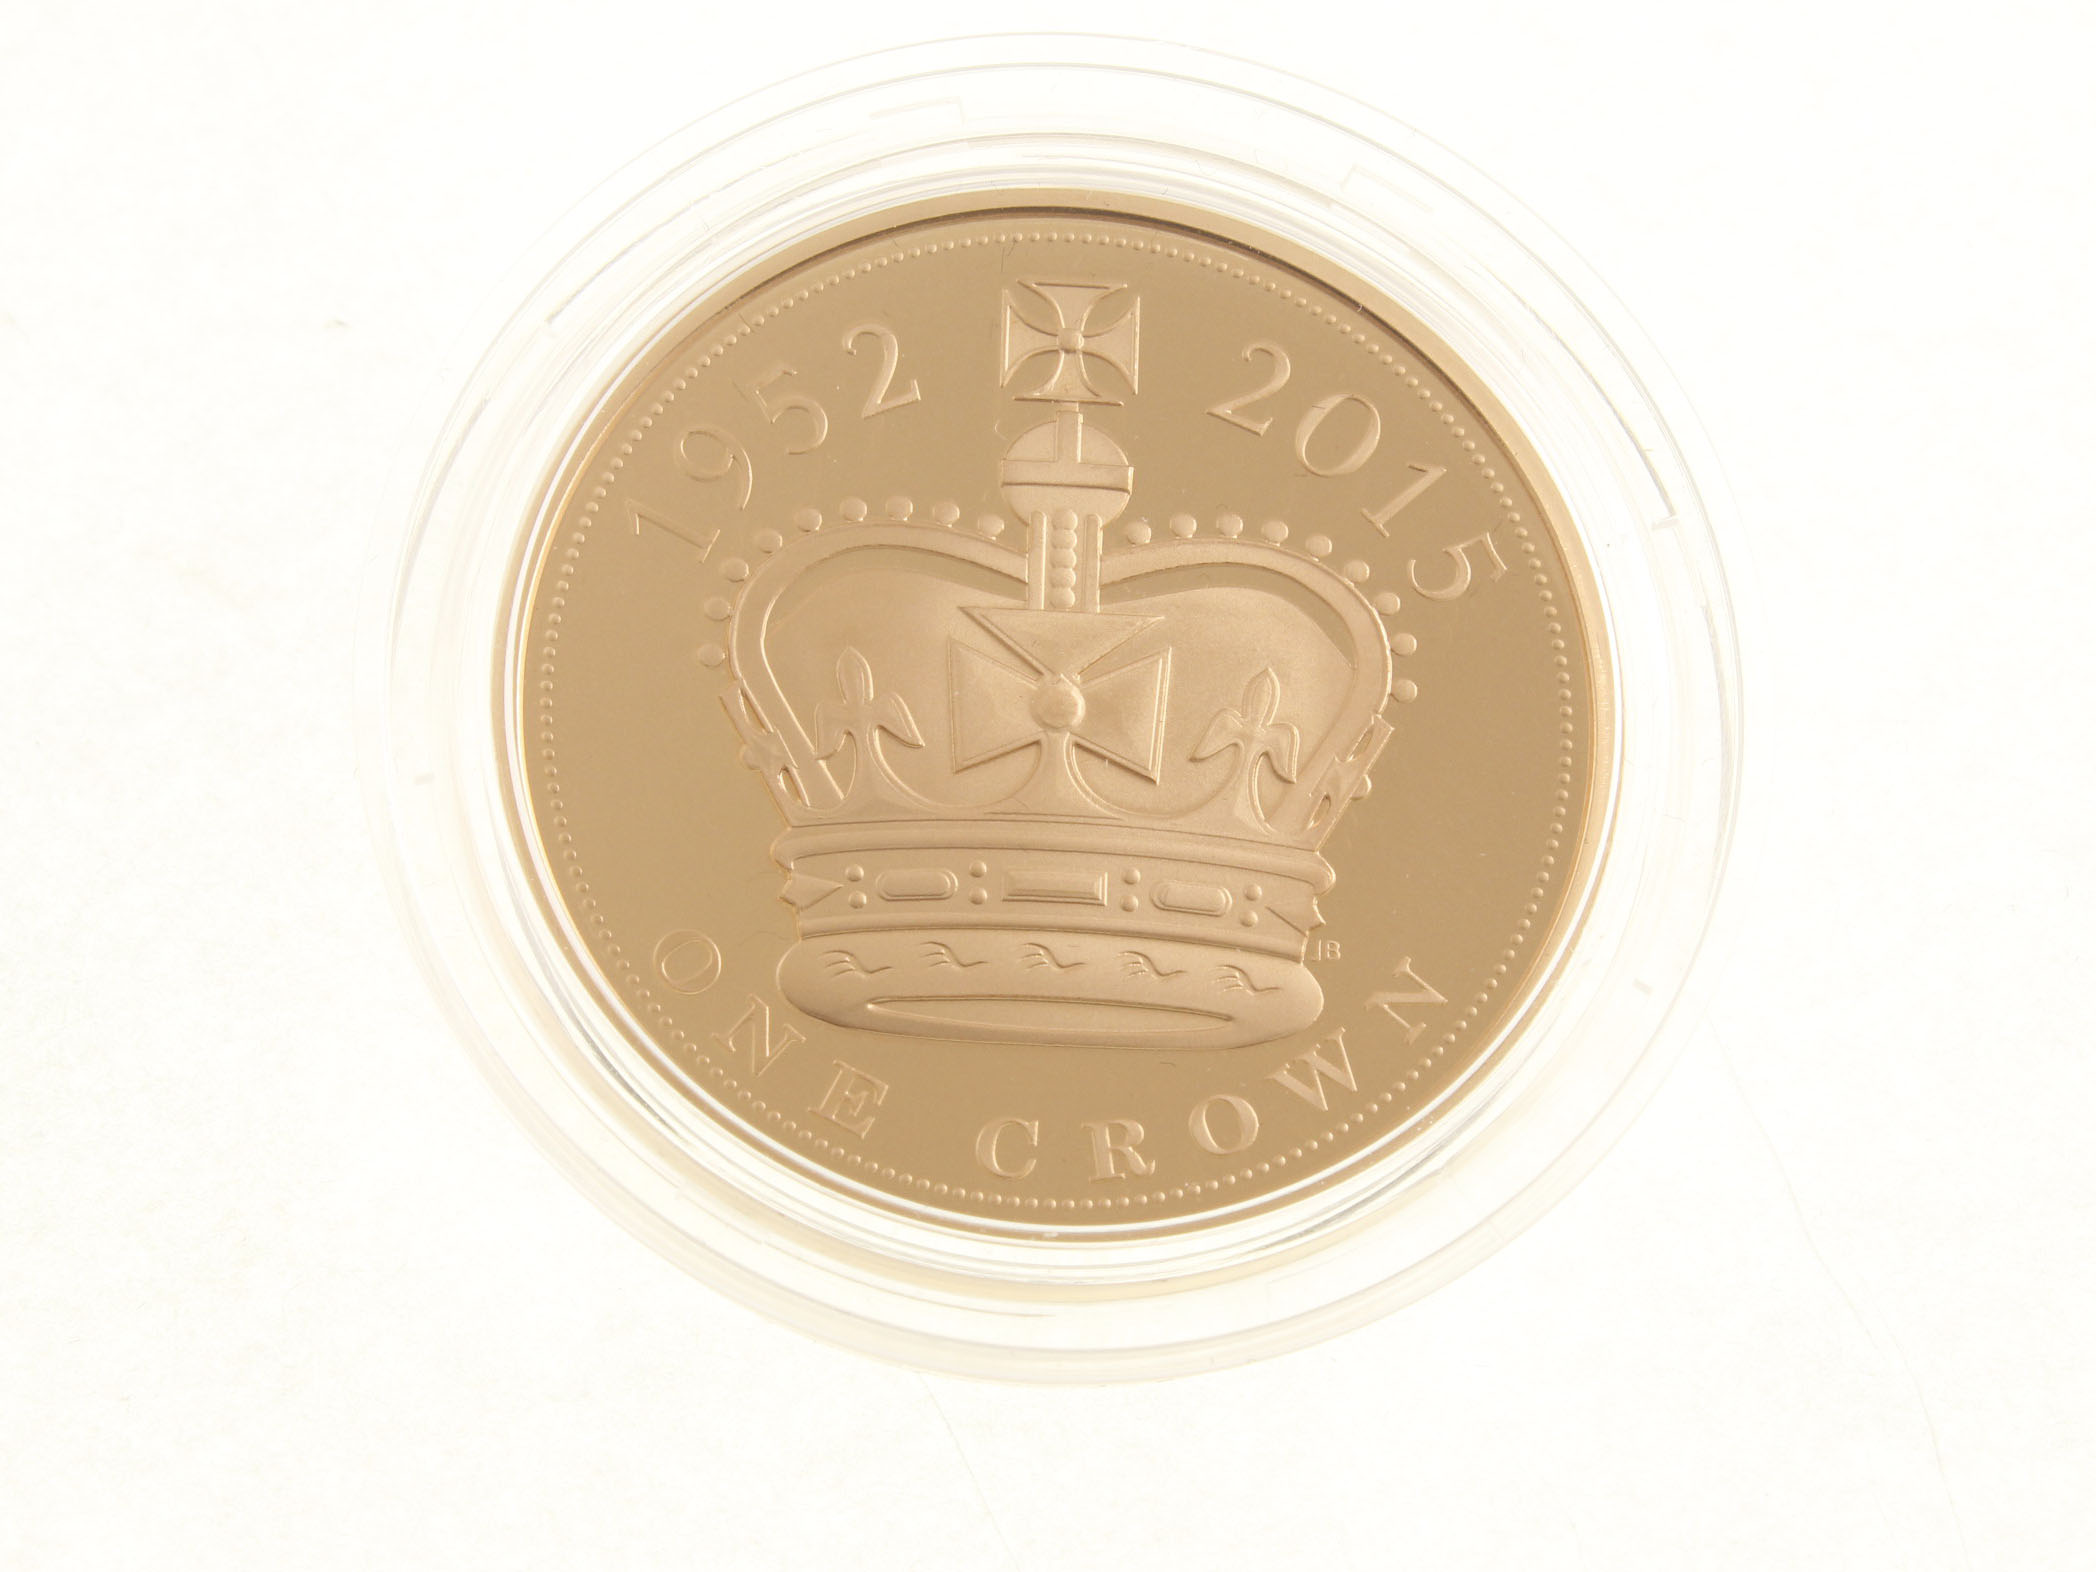 Royal Mint 2015 £5 gold proof coin "The longest reigning monarch" with box and certificate